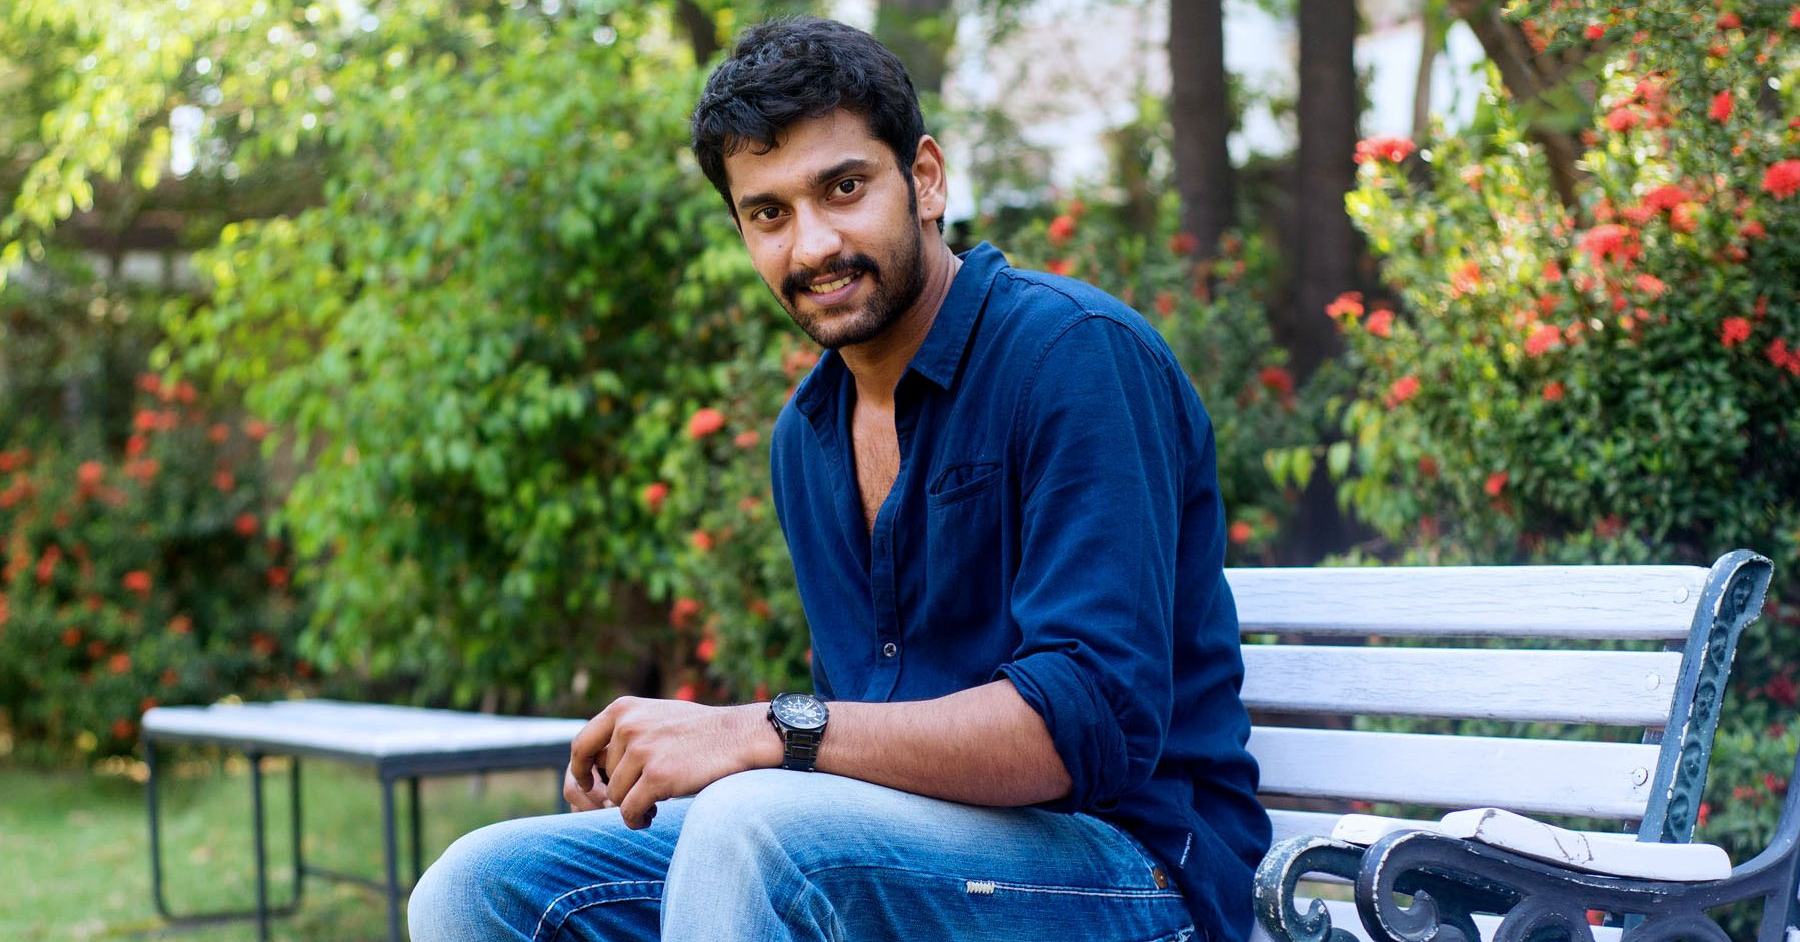 Exclusive – Arulnithi signs a web series for this OTT platform